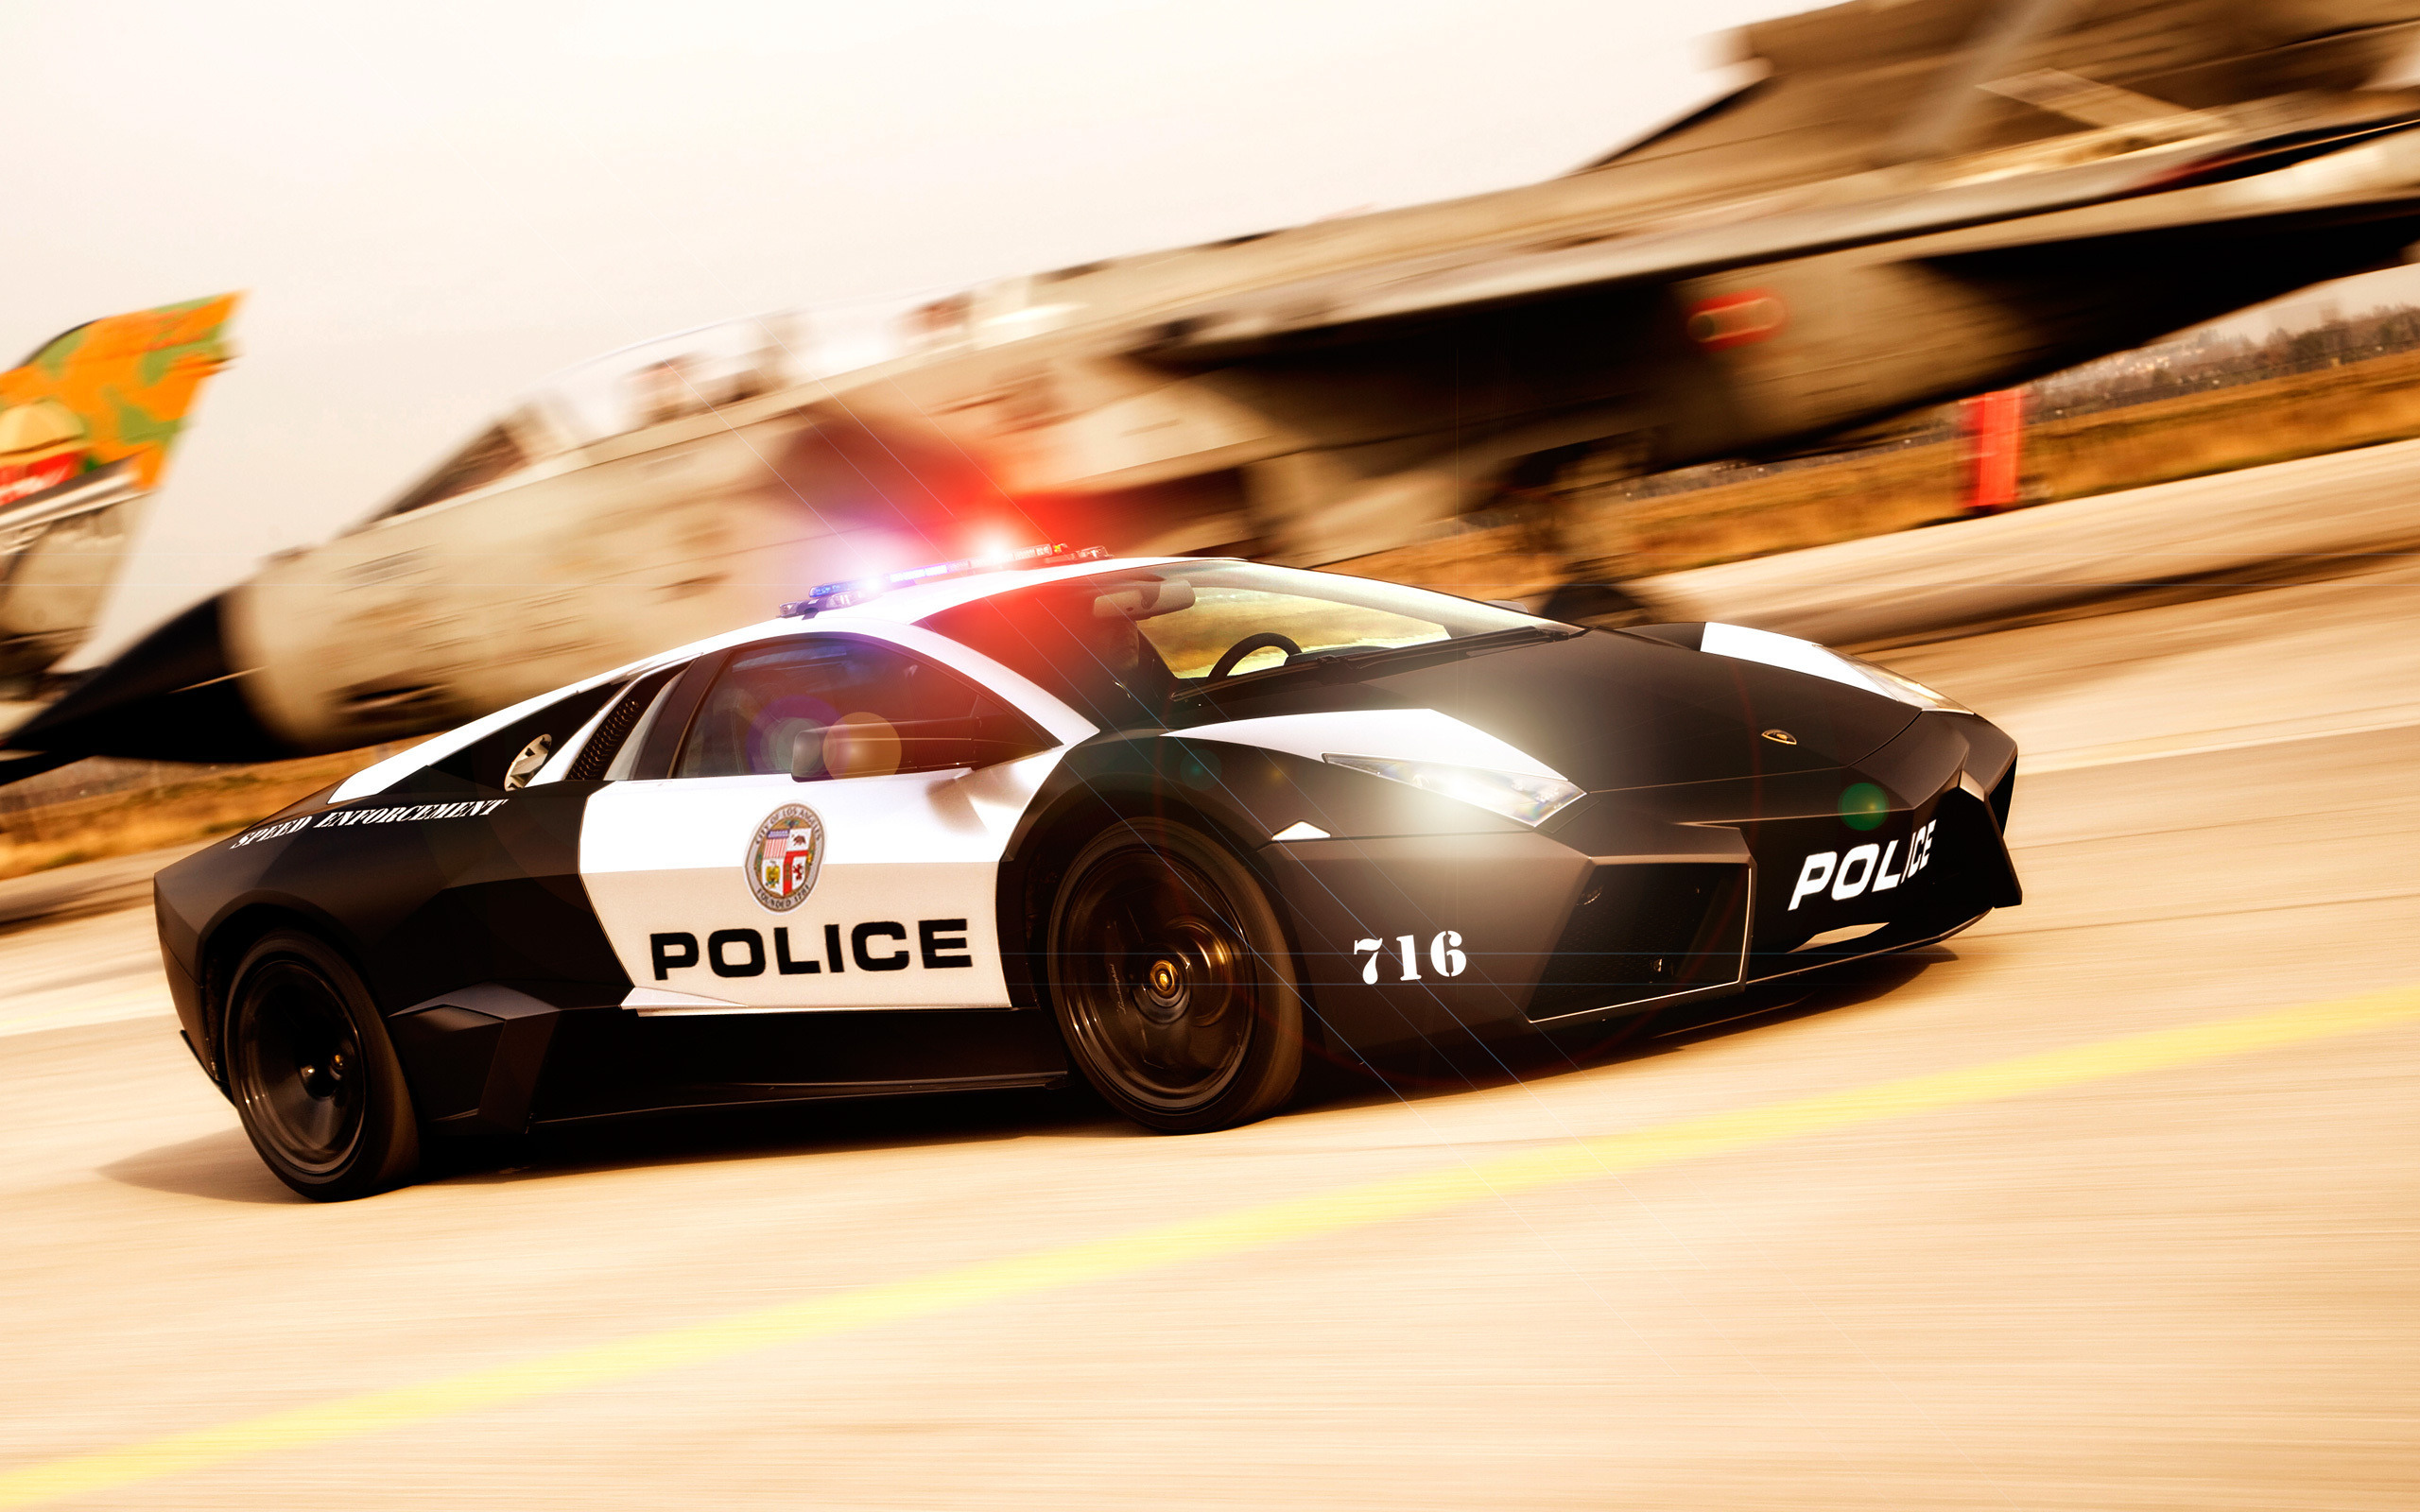 NFS Police Car Wallpapers   2560x1600   905777